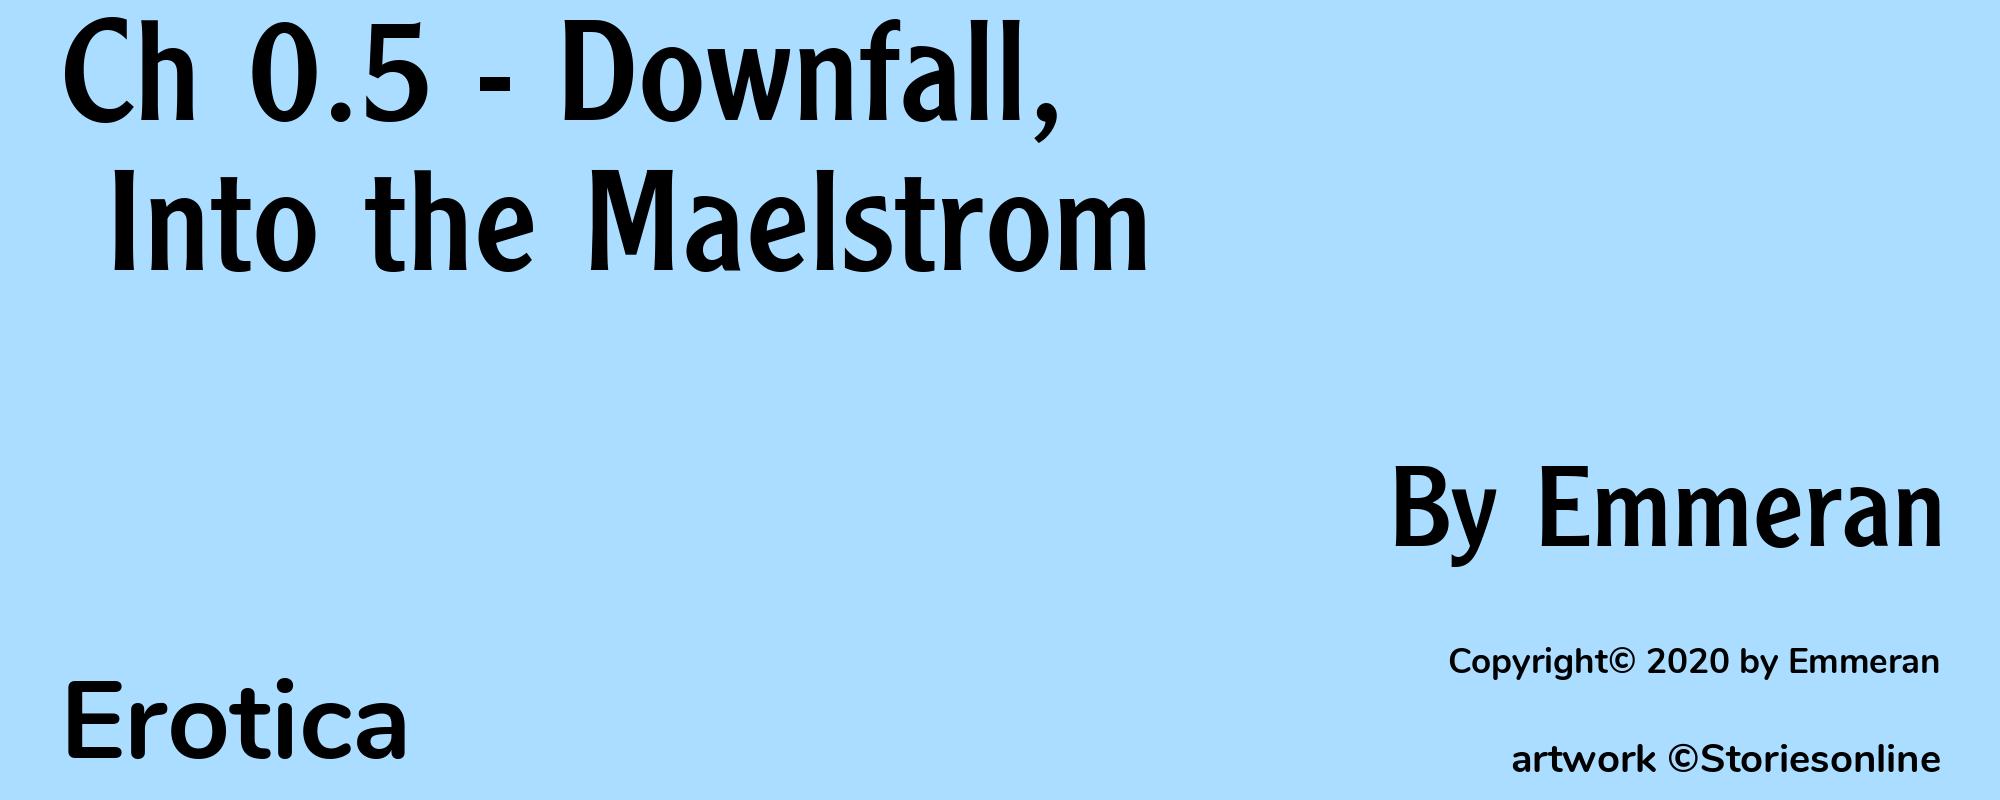 Ch 0.5 - Downfall, Into the Maelstrom - Cover